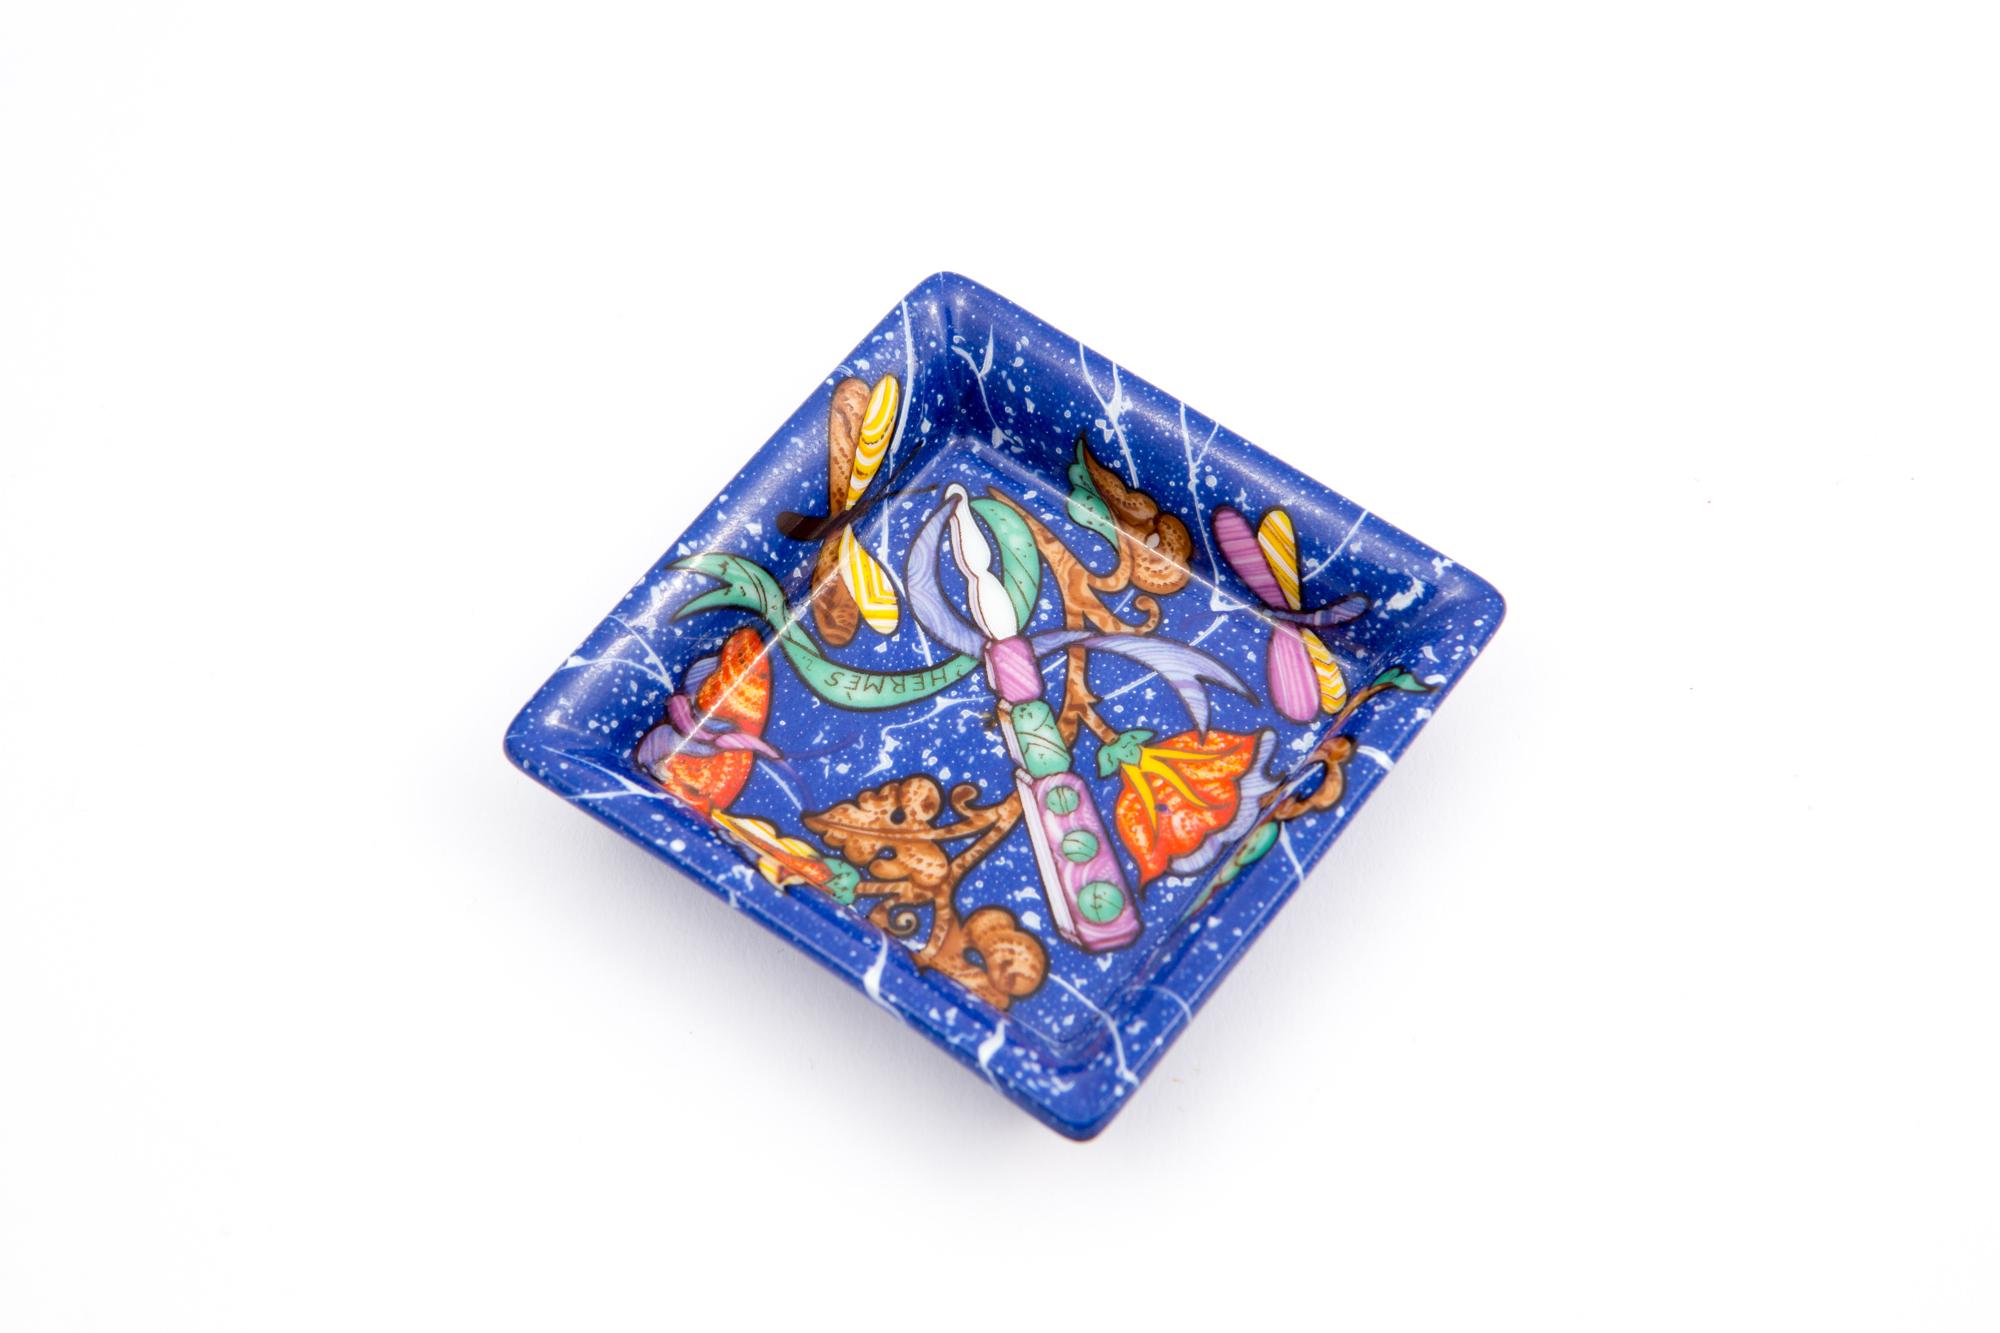  Hermes small blue change tray featuring a blue flower and butterflies scene. 
In excellent vintage condition. Made in France.
3,1in. (8cm) X 3,1in. (8cm)
We guarantee you will receive this  iconic item as described and showed on photos.
(please